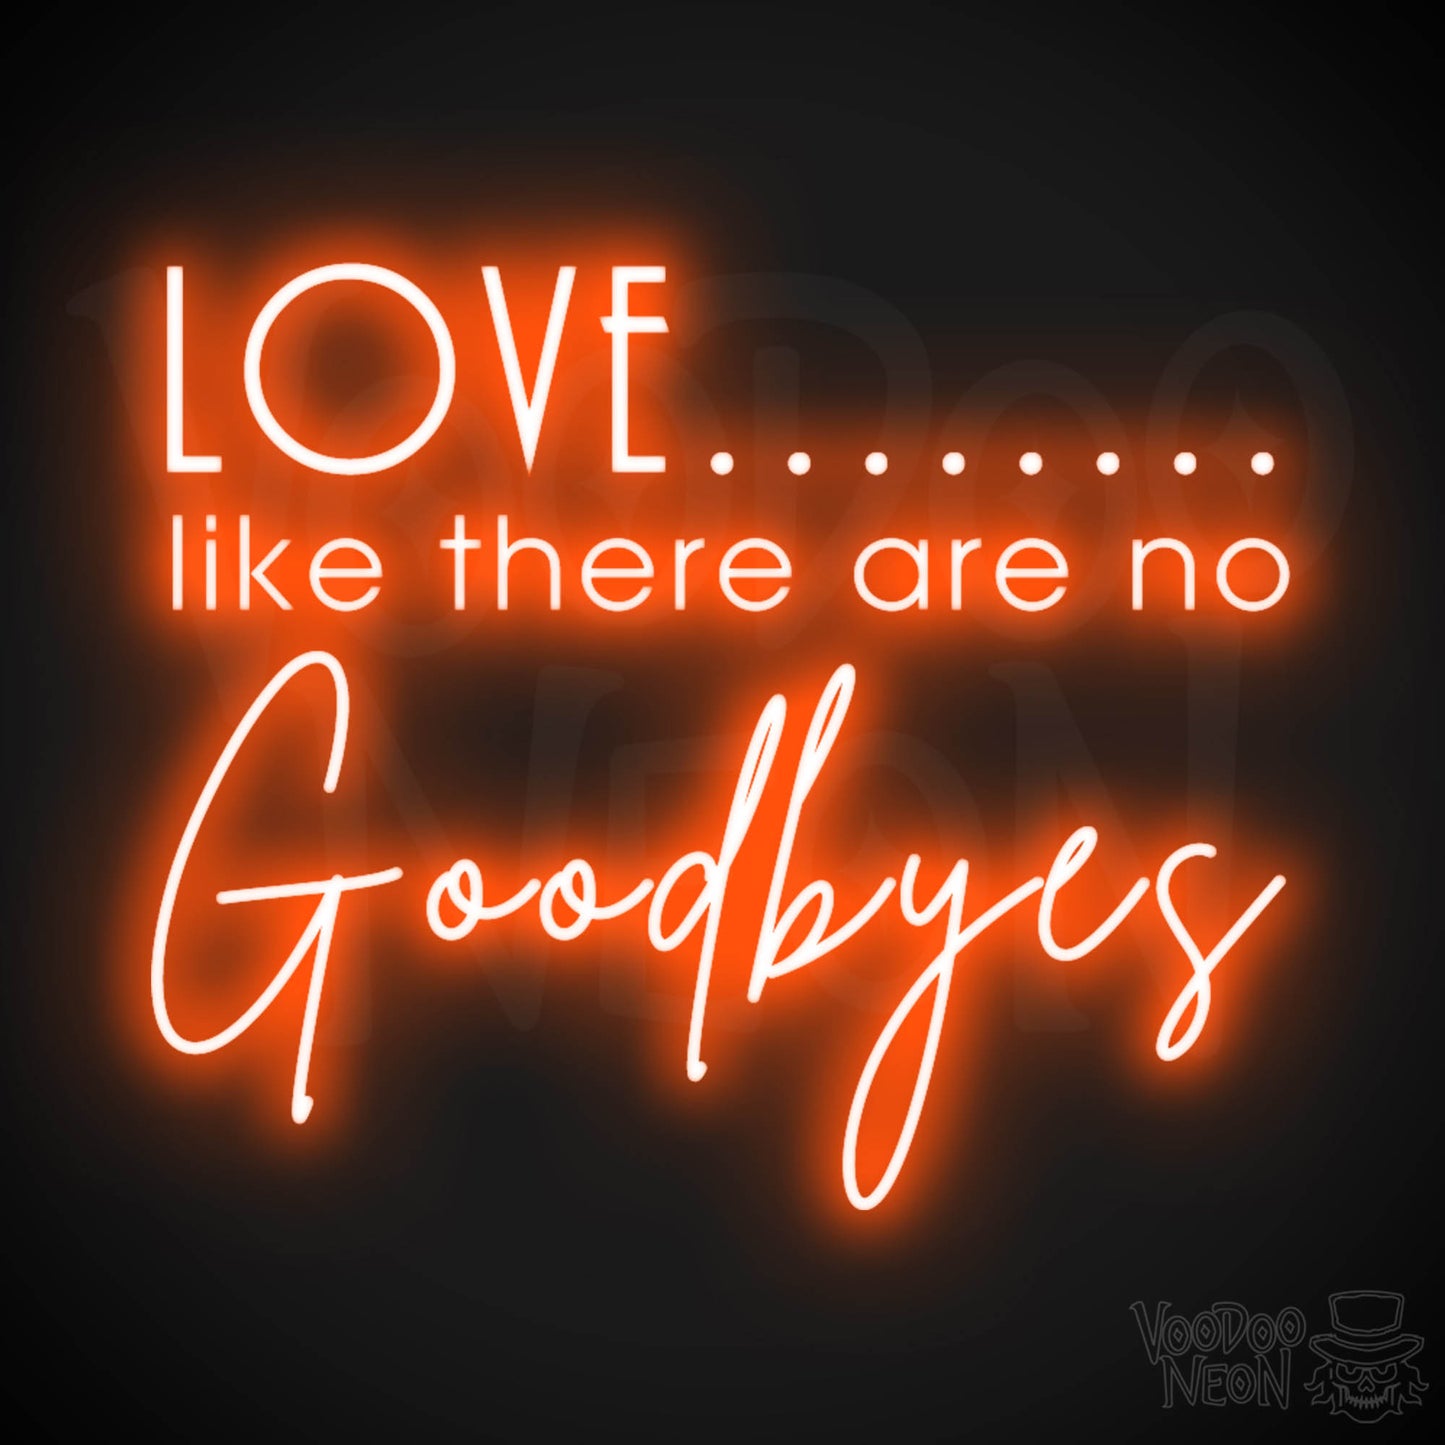 Love Like There Are No Goodbyes Sign - Neon Sign & Wedding Wall Art - Color Orange